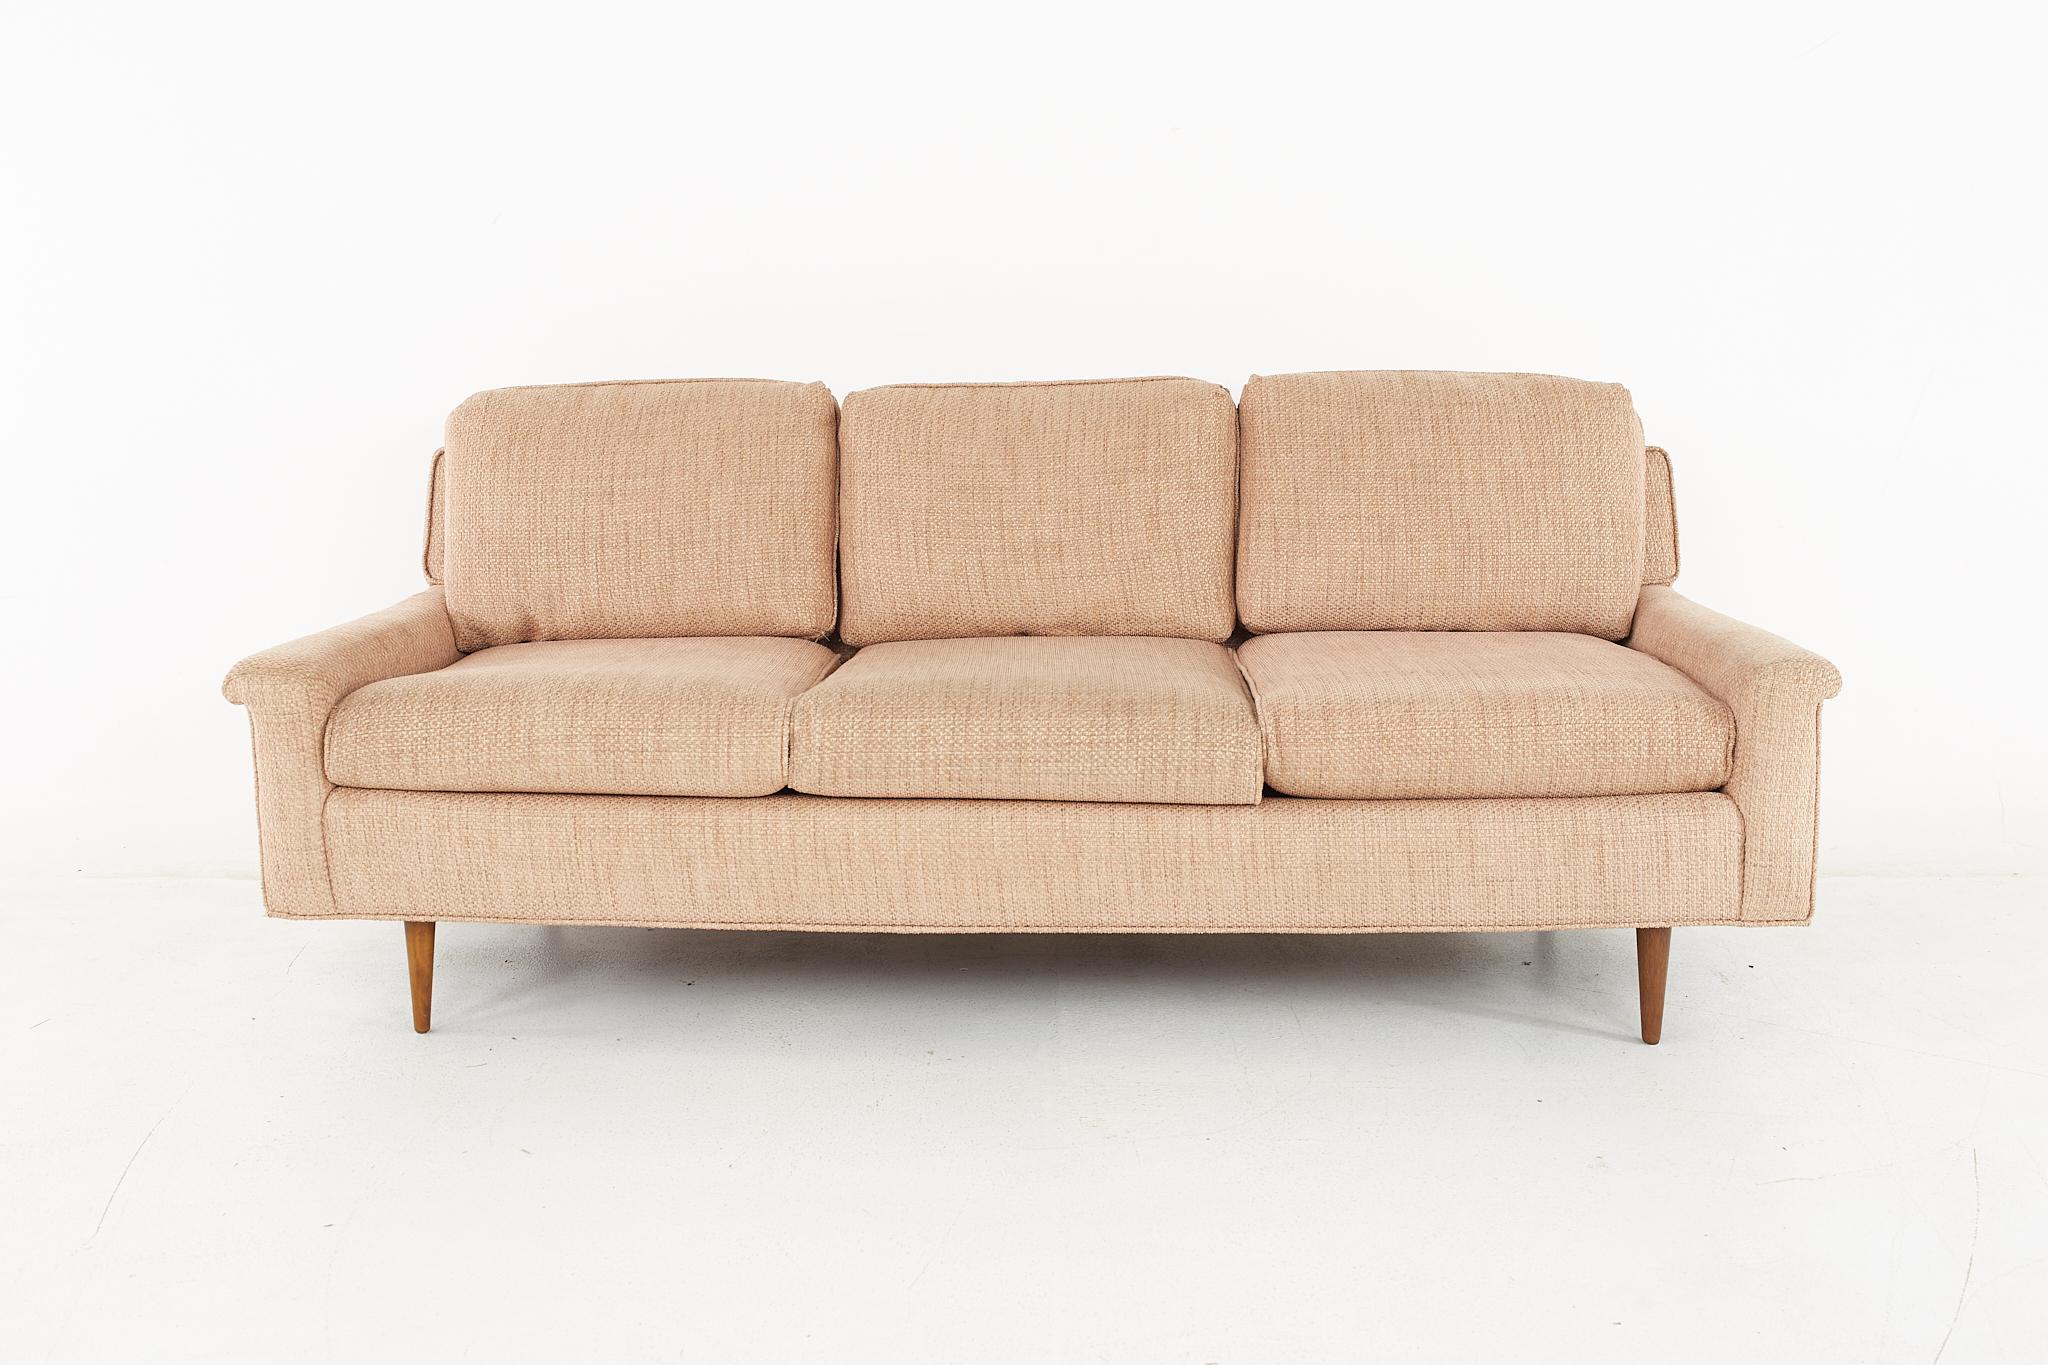 Milo Baughman for Thayer Coggin style mid century sofa with new upholstery.

This sofa measures: 77 wide x 32 deep x 31 high, with a seat height of 18 inches.

All pieces of furniture can be had in what we call restored vintage condition. That